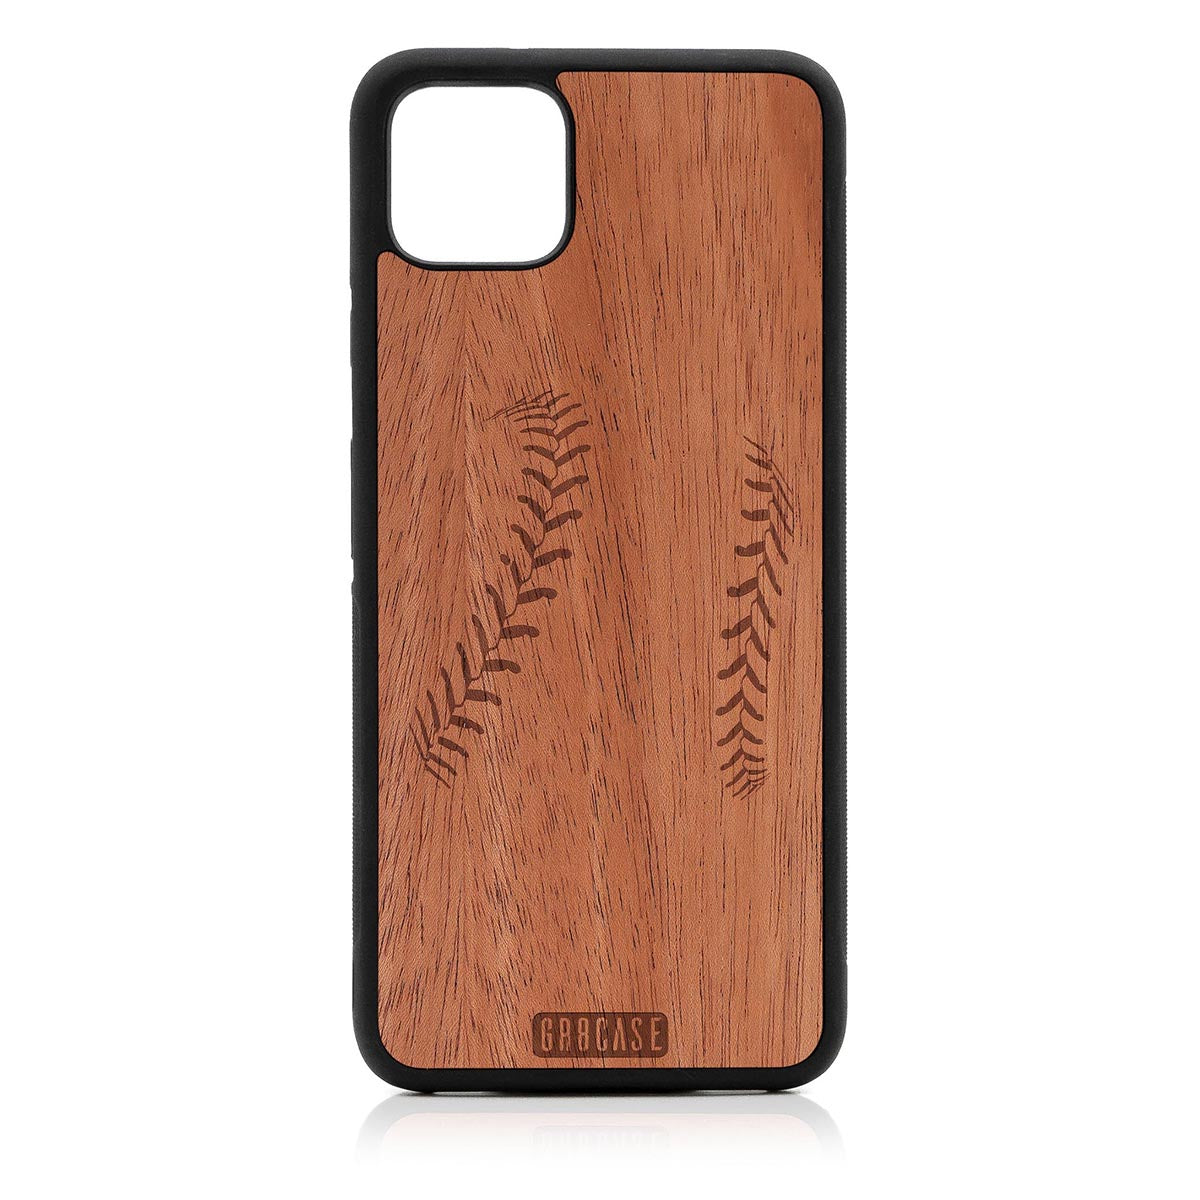 Baseball Stitches Design Wood Case For Google Pixel 4 XL by GR8CASE